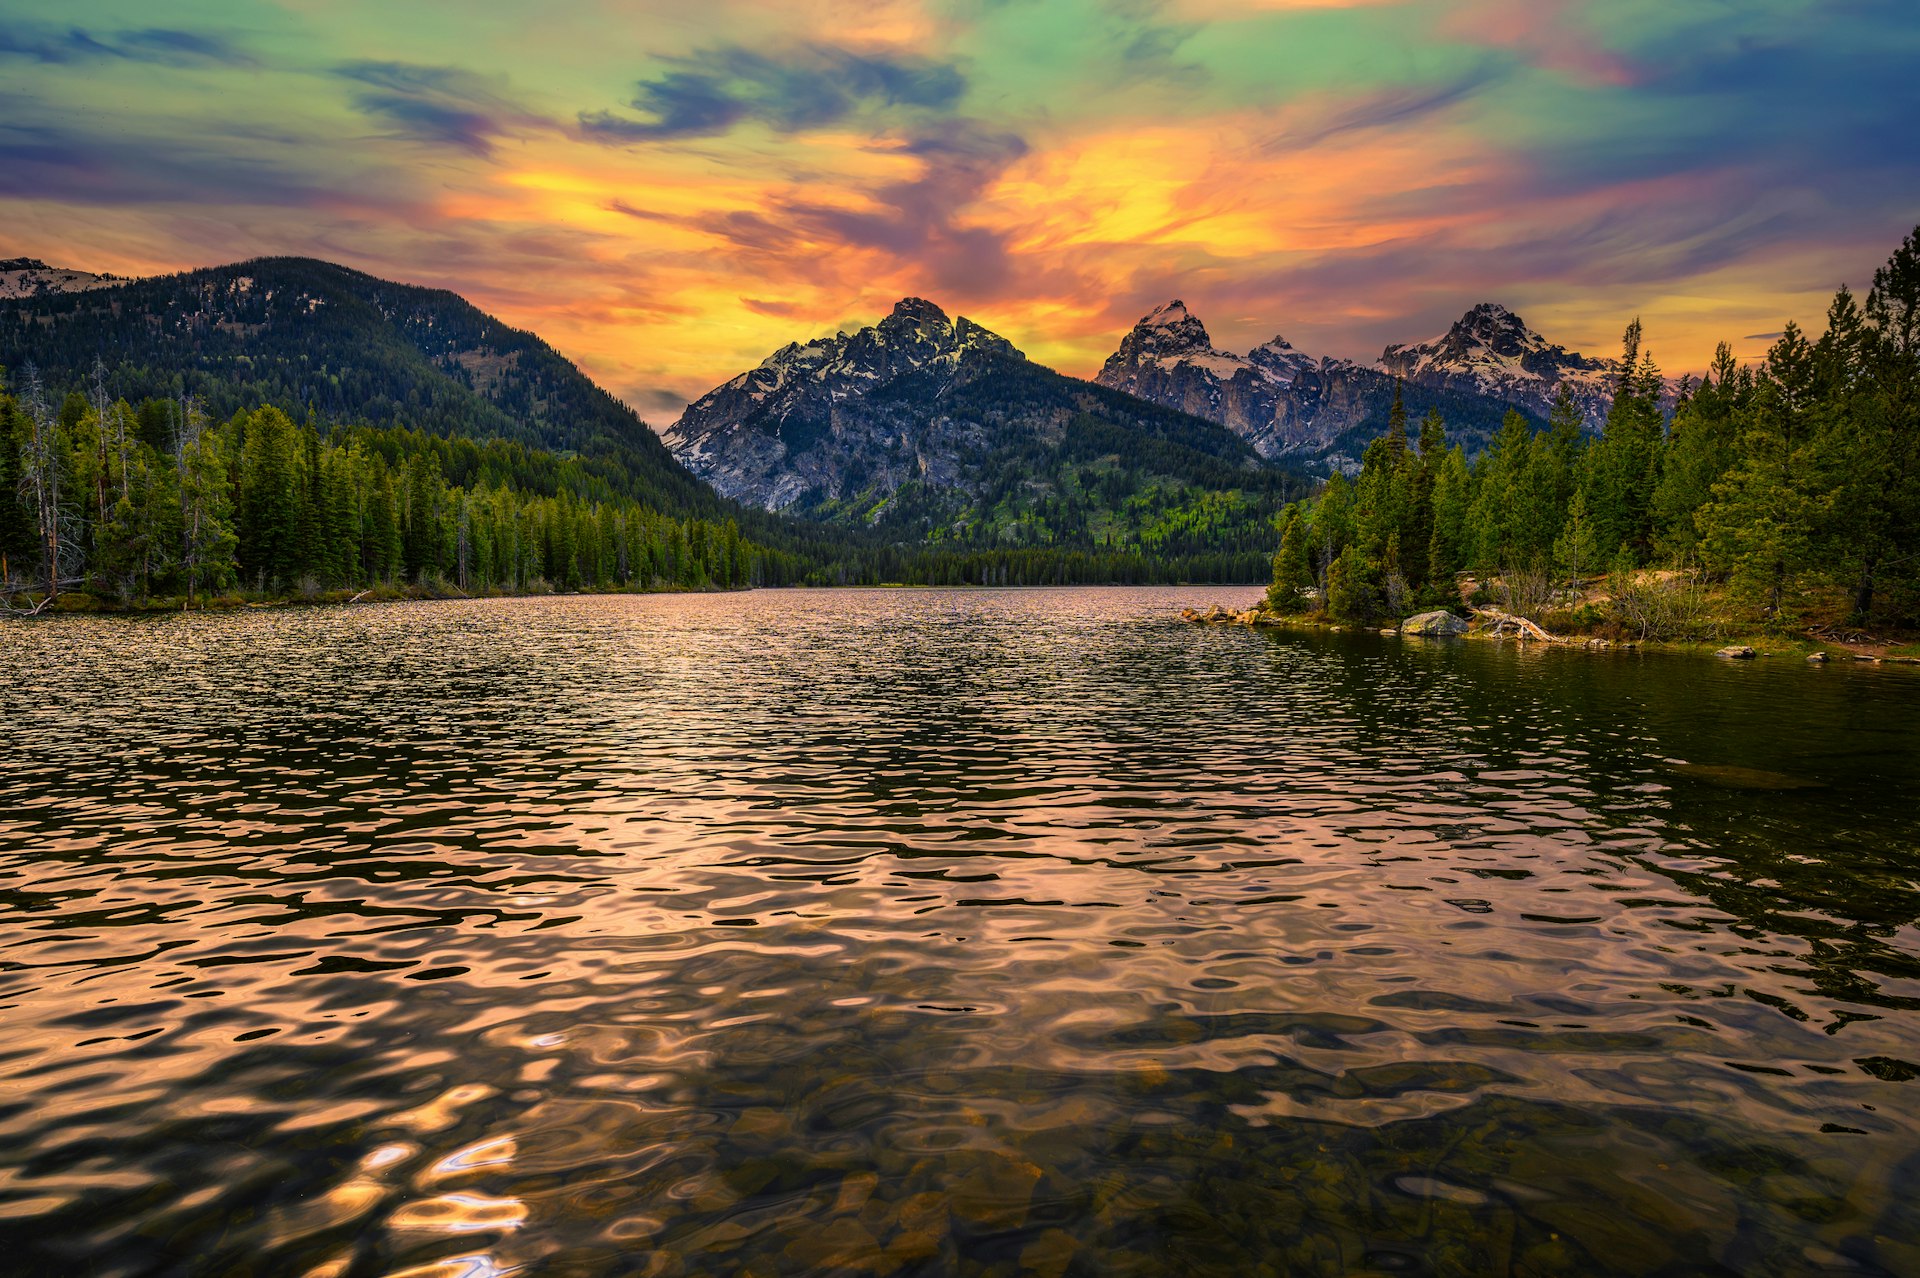 Sunset over Taggart Lake and Grand Teton Mountains in Wyoming, USA. Taggart Lake is a stunning alpine lake in Grand Teton National Park, surrounded by majestic mountains